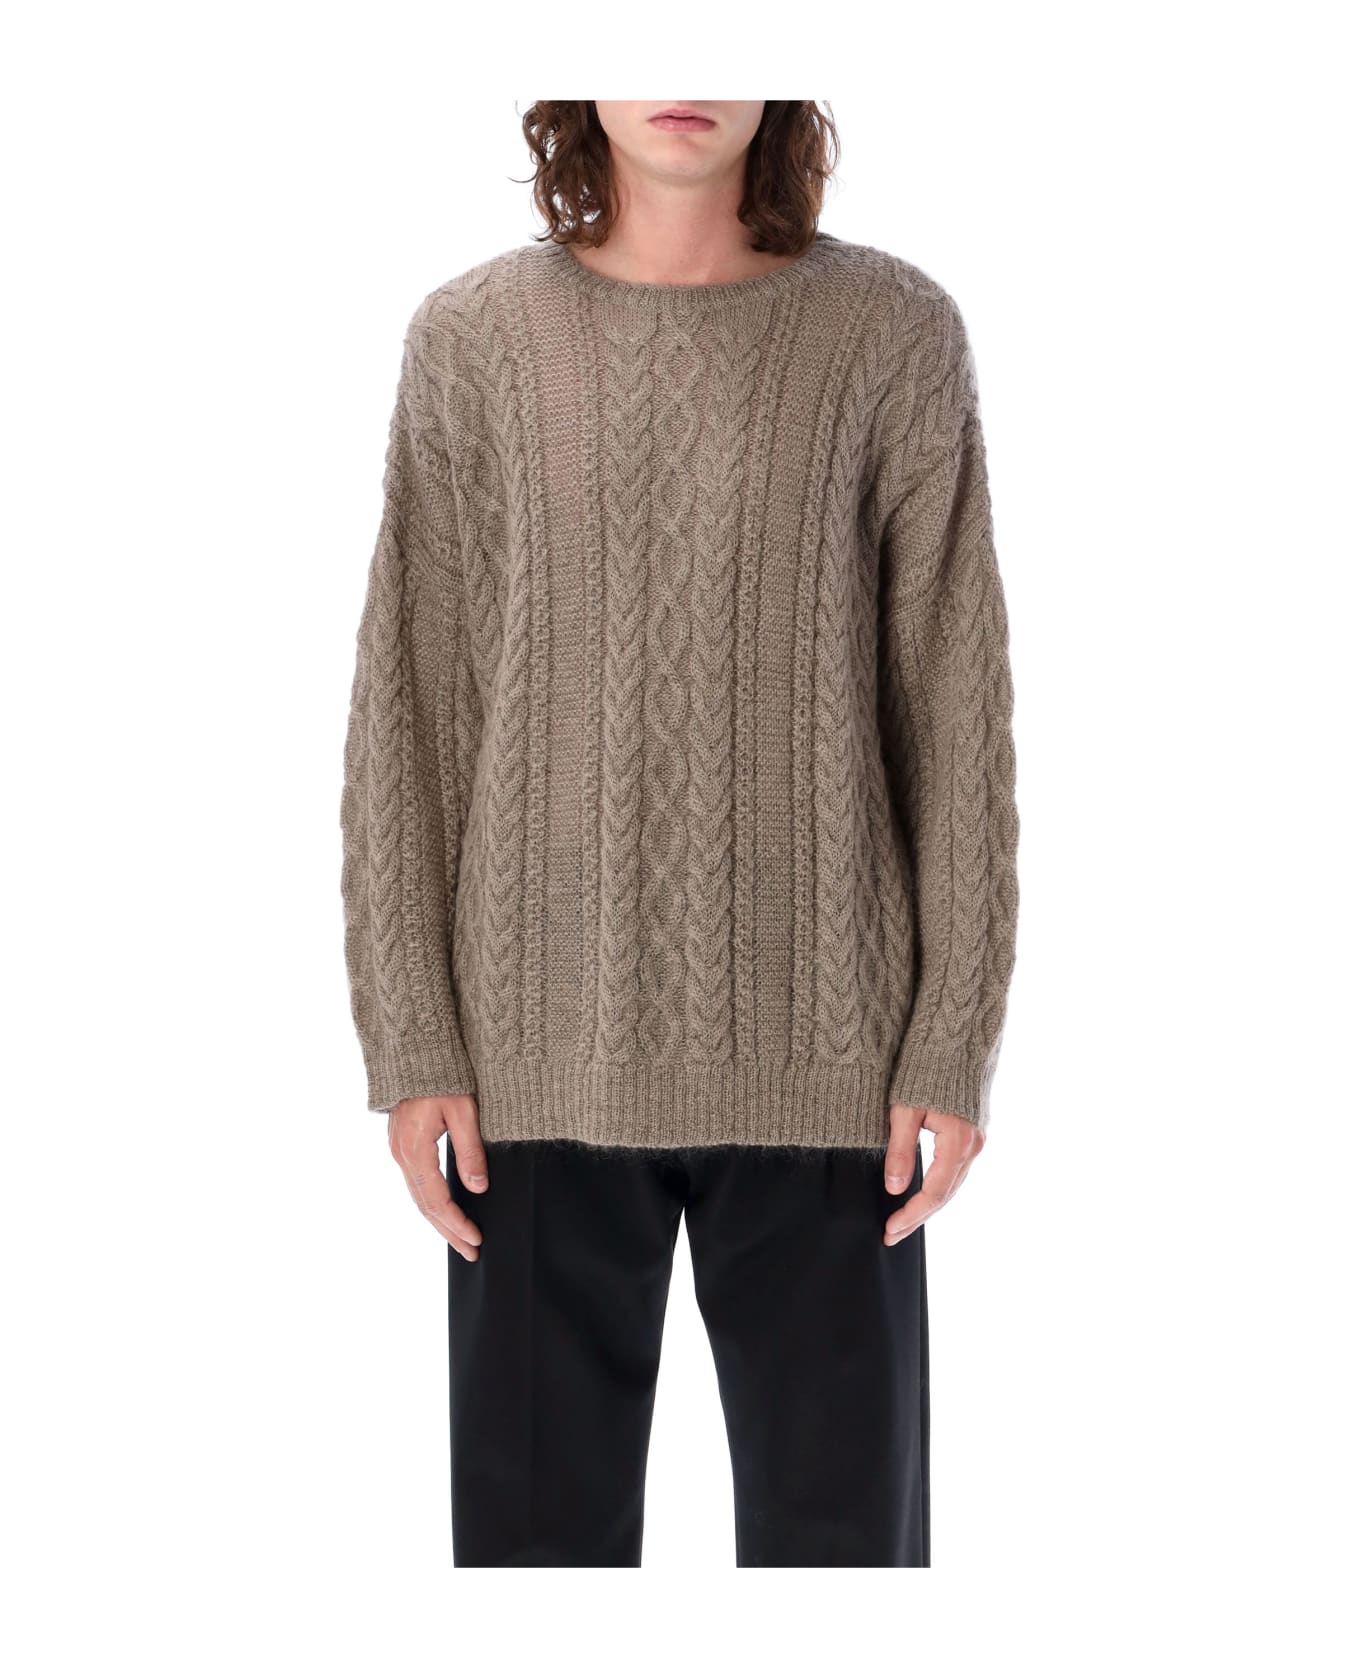 Undercover Jun Takahashi Cable Knit Sweater - GREY BEIGE